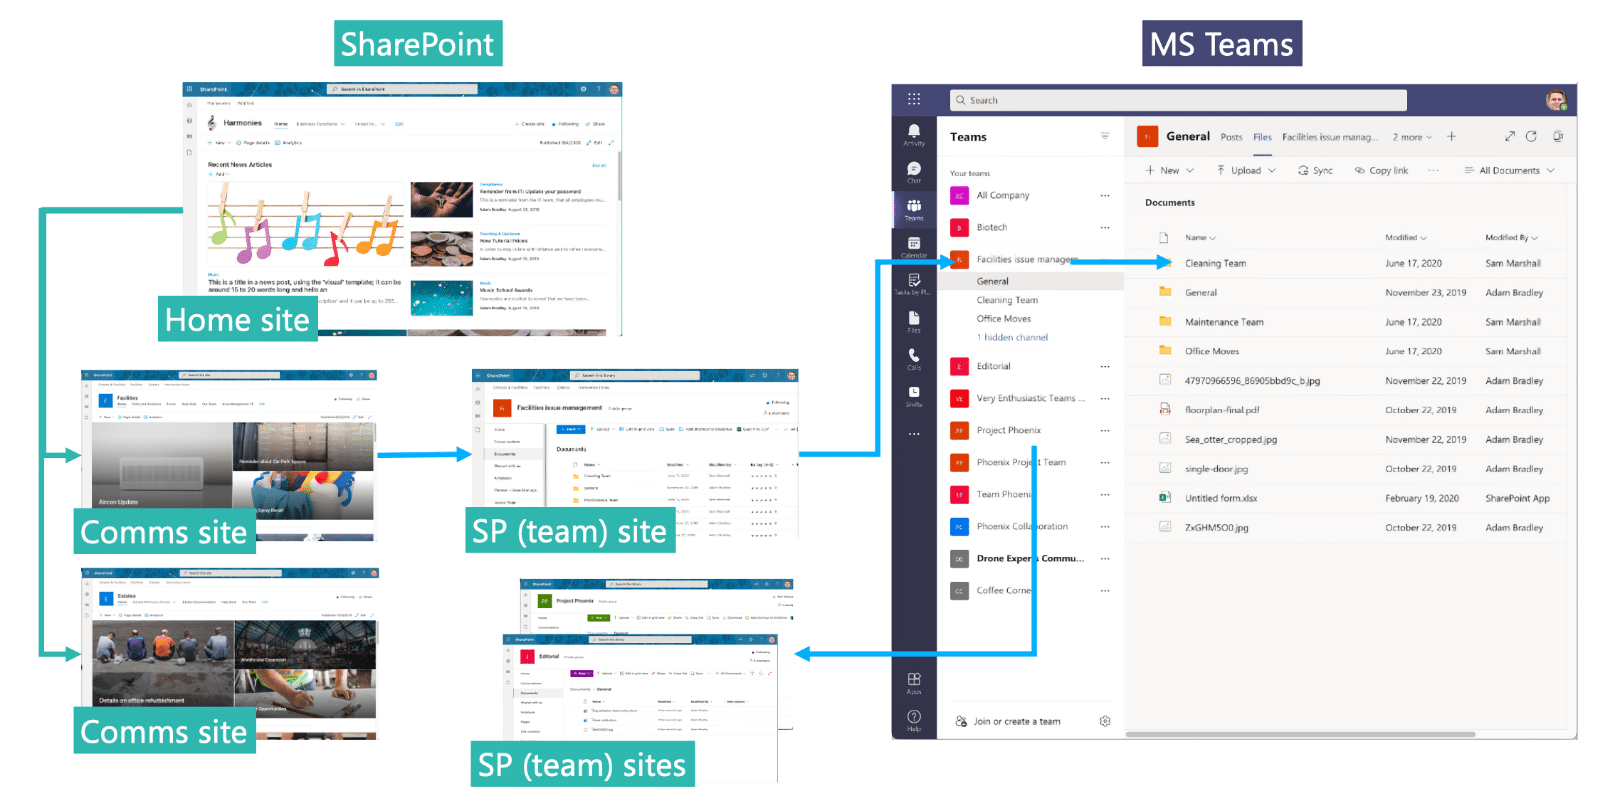 Annotated screenshots showing relationship between SharePoint and Microsoft Teams.